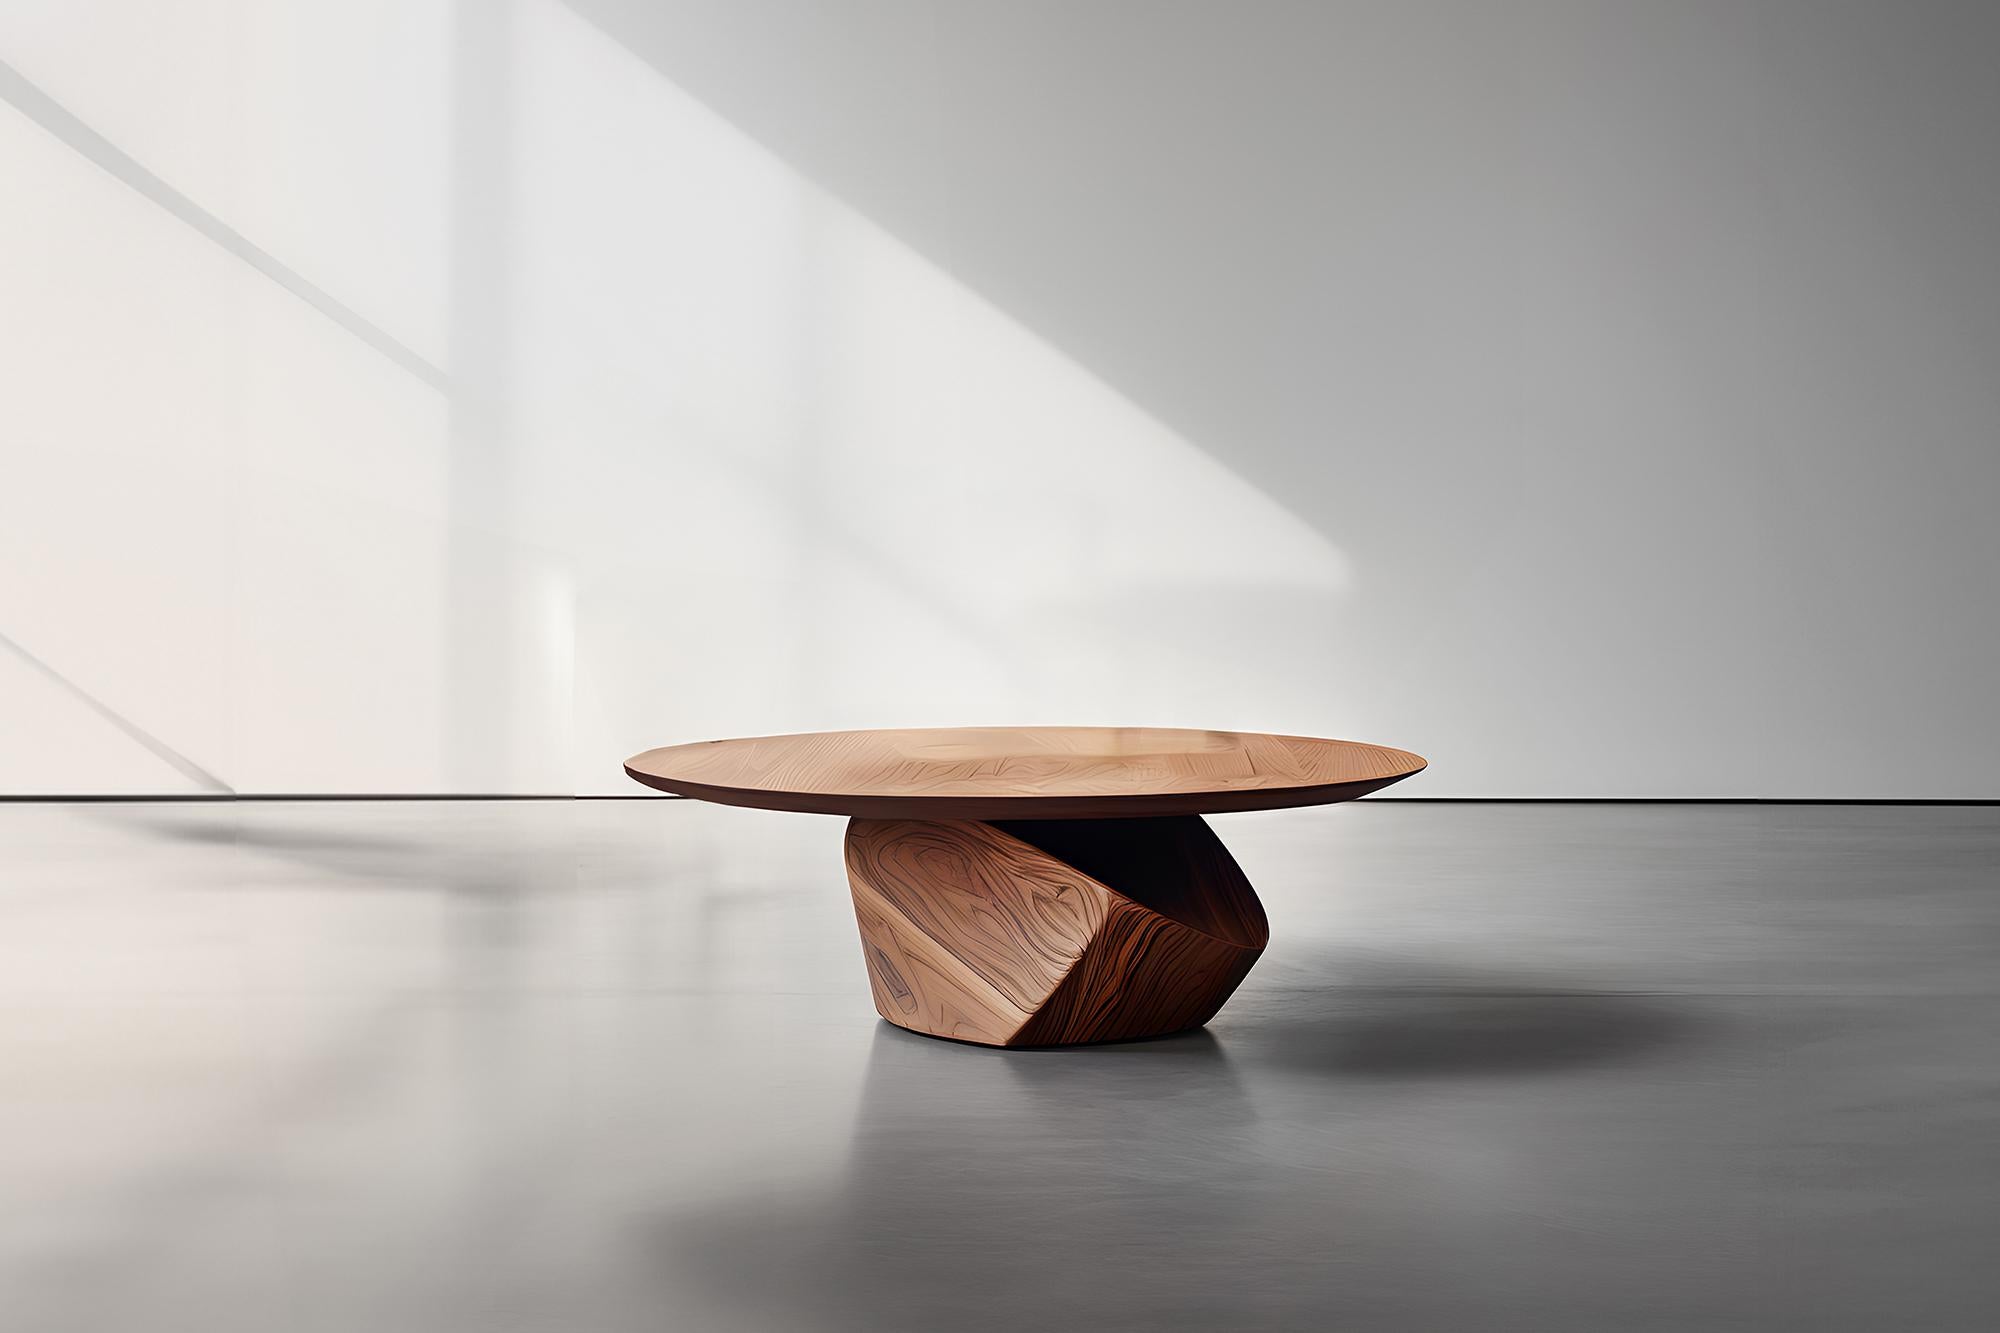 Sculptural Coffee Table Made of Solid Wood, Center Table Solace S35 by Joel Escalona


The Solace table series, designed by Joel Escalona, is a furniture collection that exudes balance and presence, thanks to its sensuous, dense, and irregular